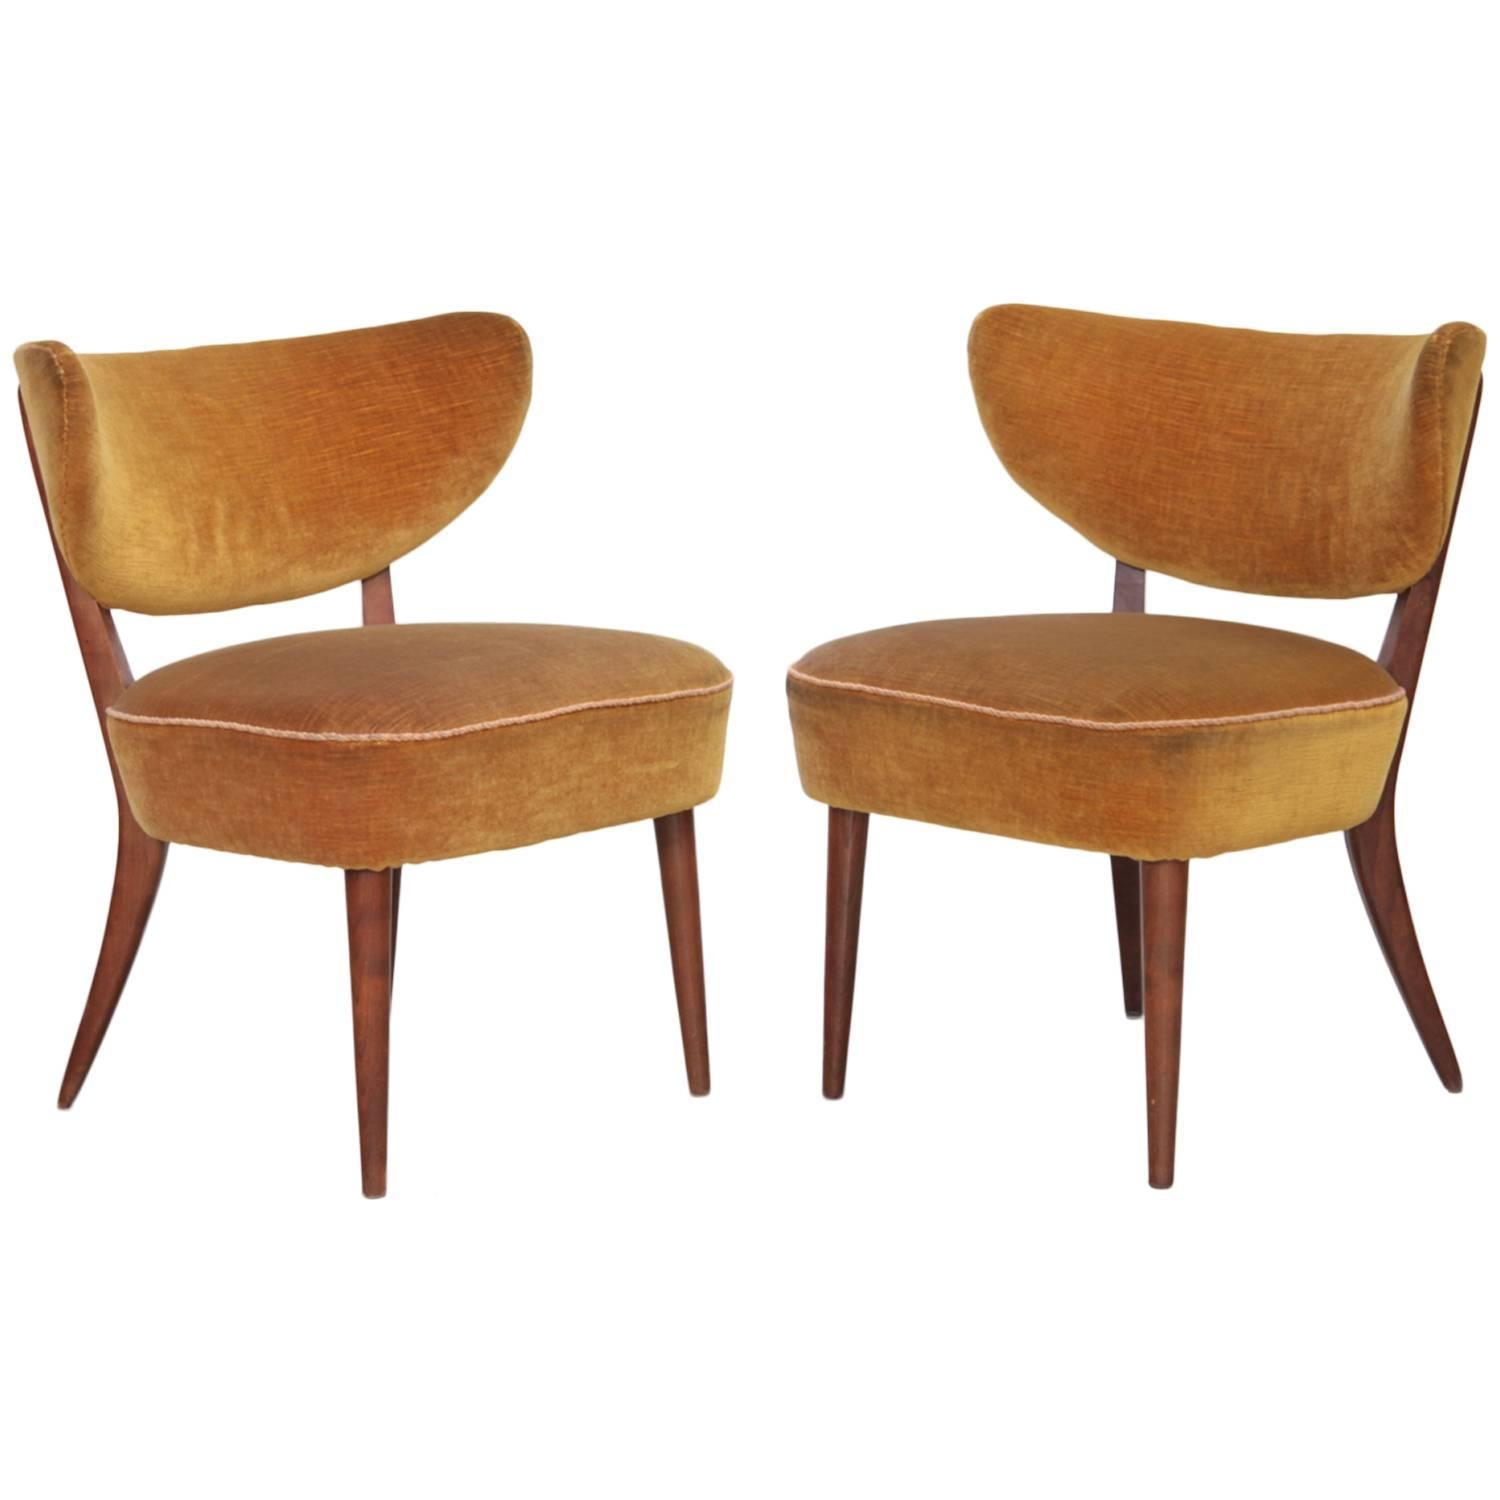 Pair of 1950s German Curved Back Chairs by Arch, Traulsen in Mohair Fabric